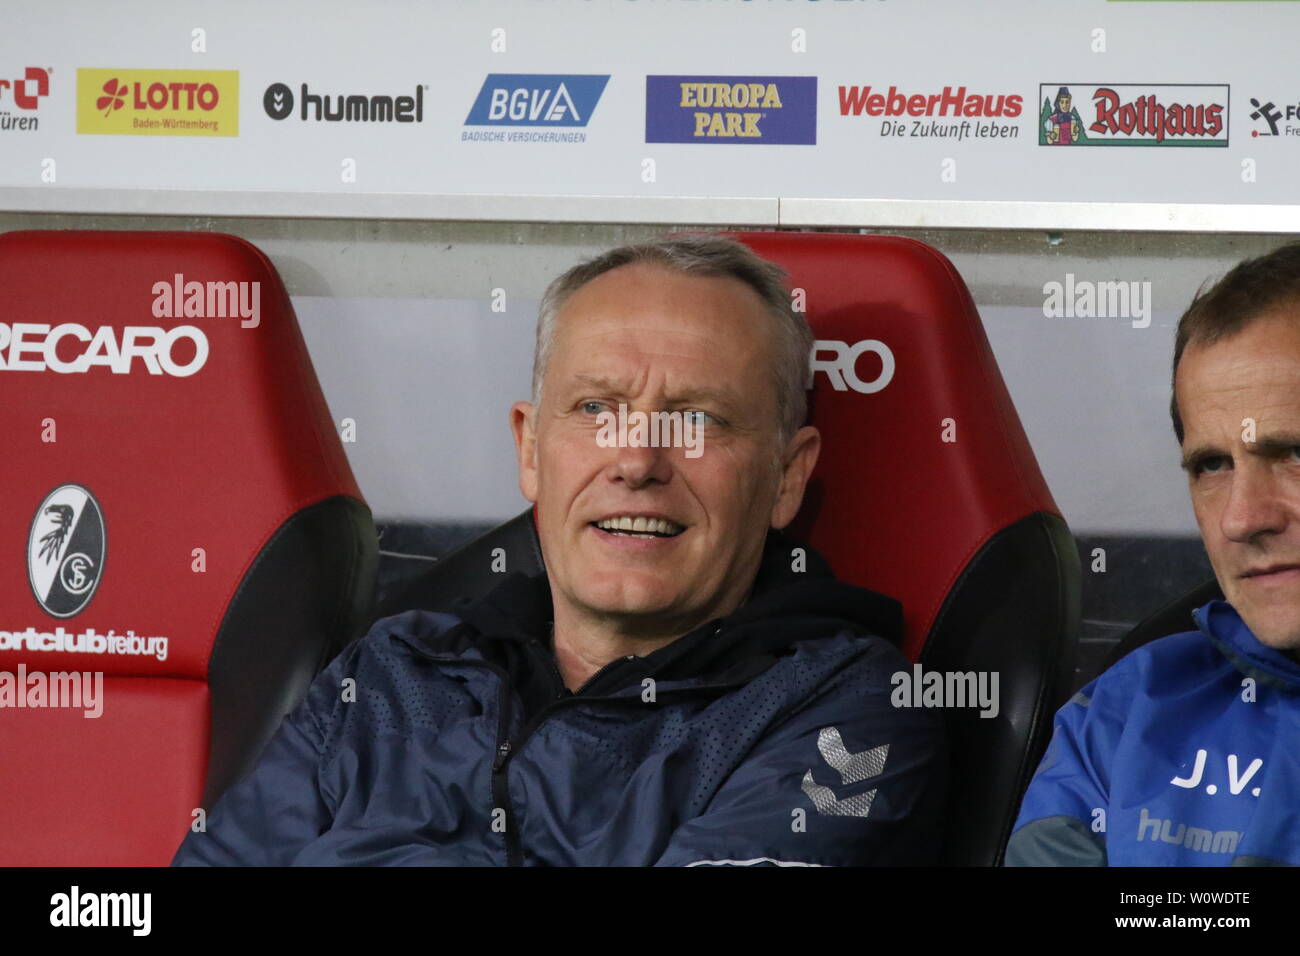 Hatte gut lachen: Trainer Christian Streich (Freiburg),   1. BL: 18-19: 25. Sptg. -  SC Freiburg vs. Hertha BSC Berlin  DFL REGULATIONS PROHIBIT ANY USE OF PHOTOGRAPHS AS IMAGE SEQUENCES AND/OR QUASI-VIDEO  Foto: Joachim Hahne/johapress Stock Photo